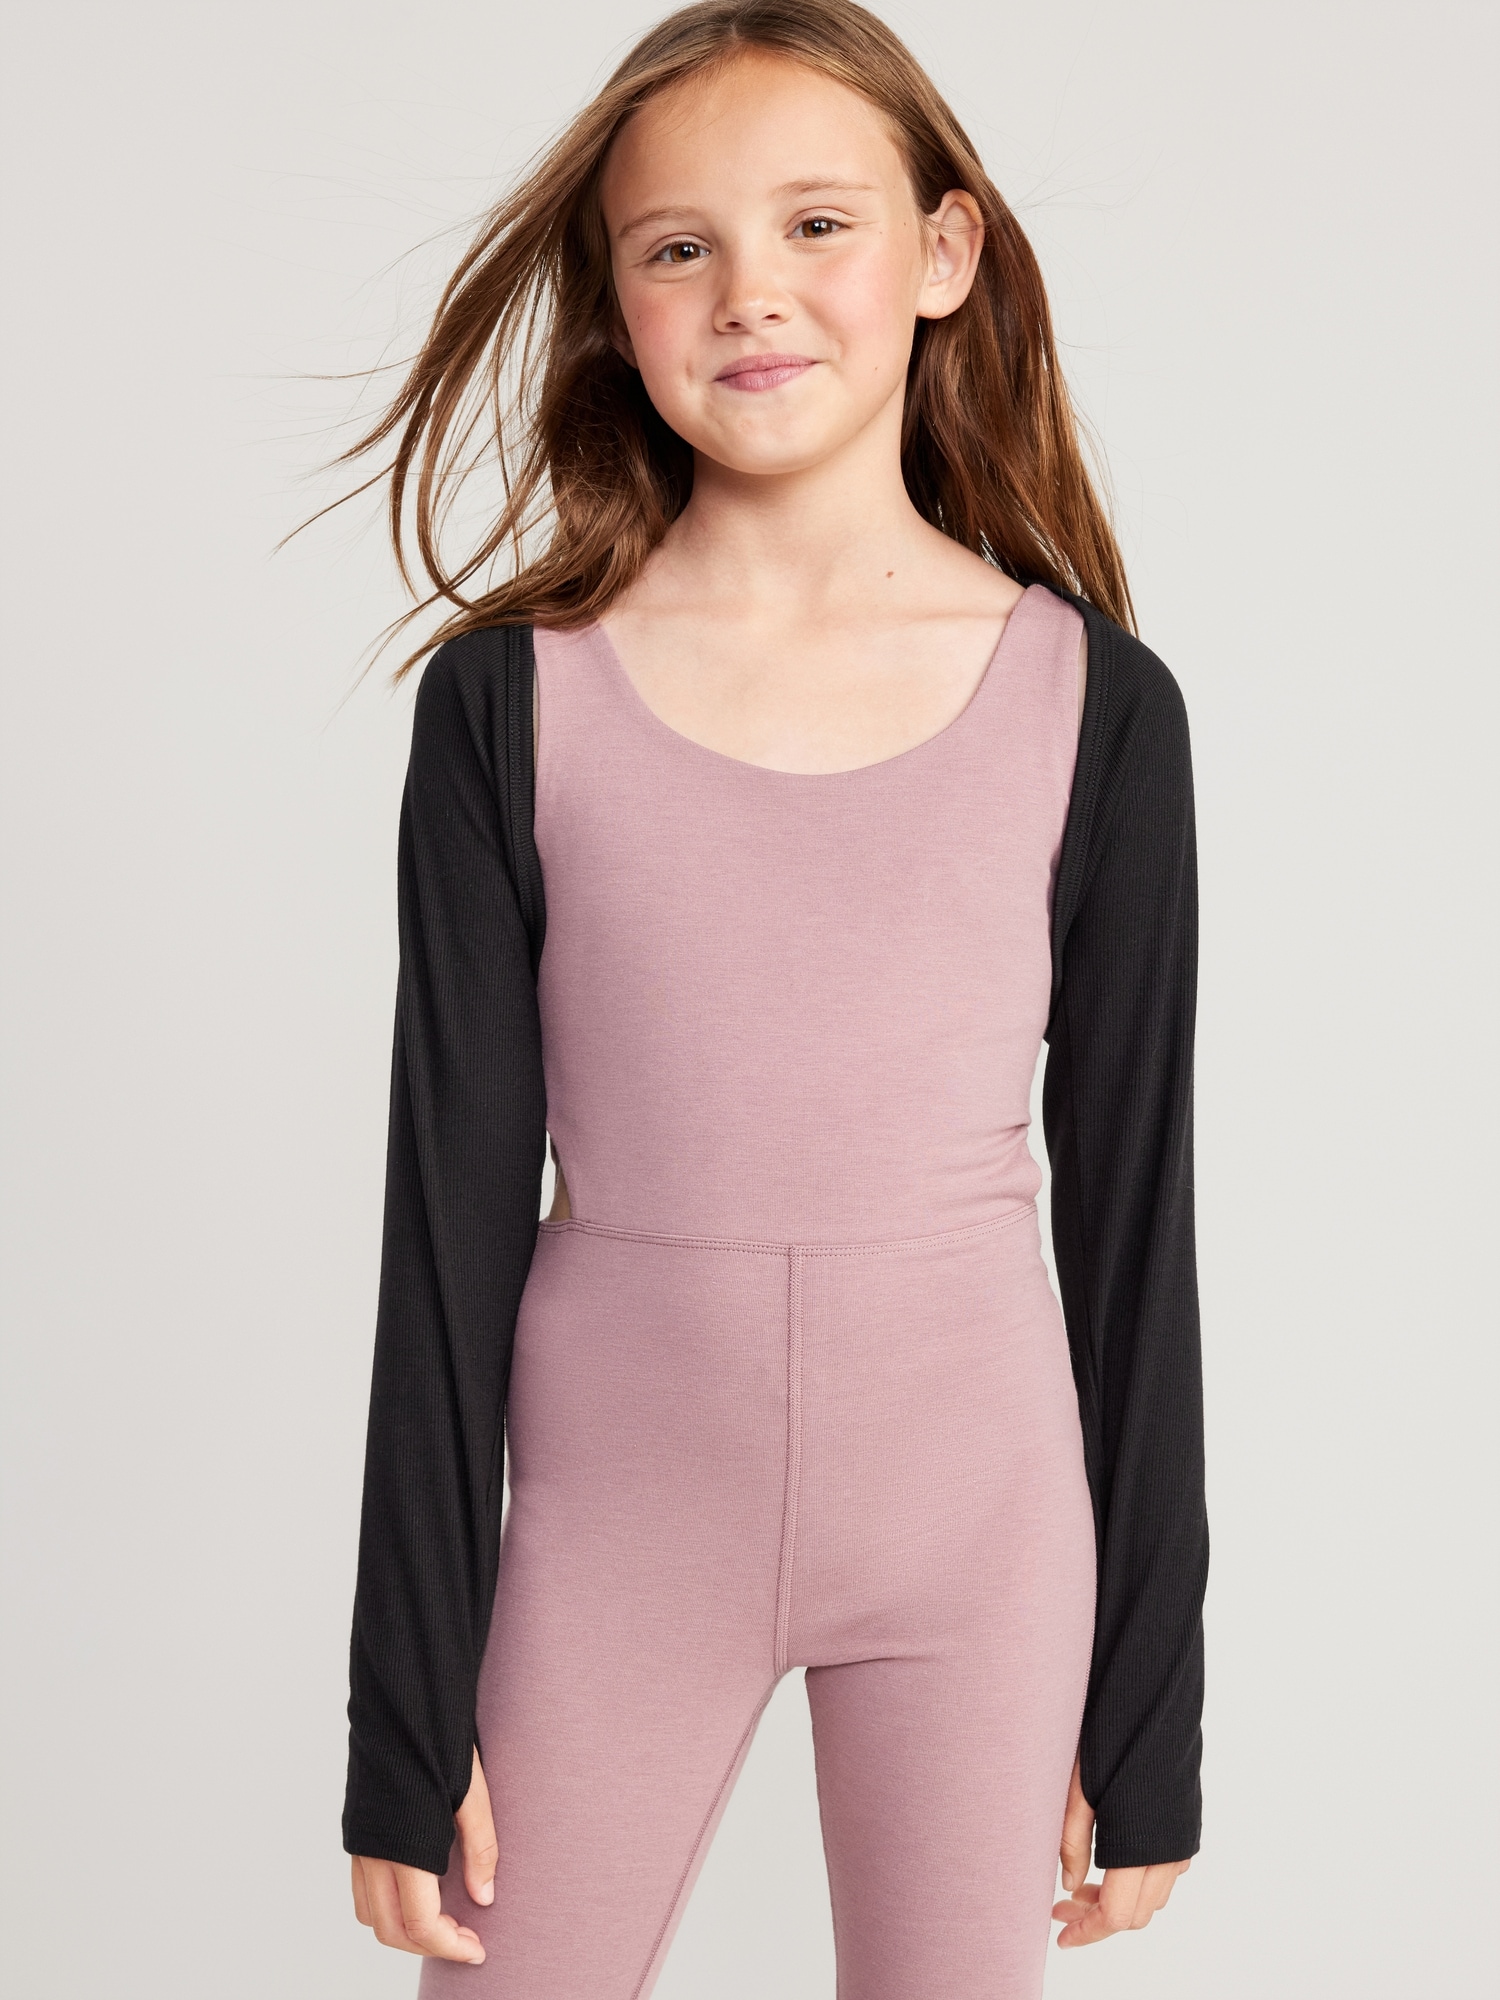 UltraLite Rib-Knit Cropped Open-Front Shrug Cardigan for Girls | Old Navy